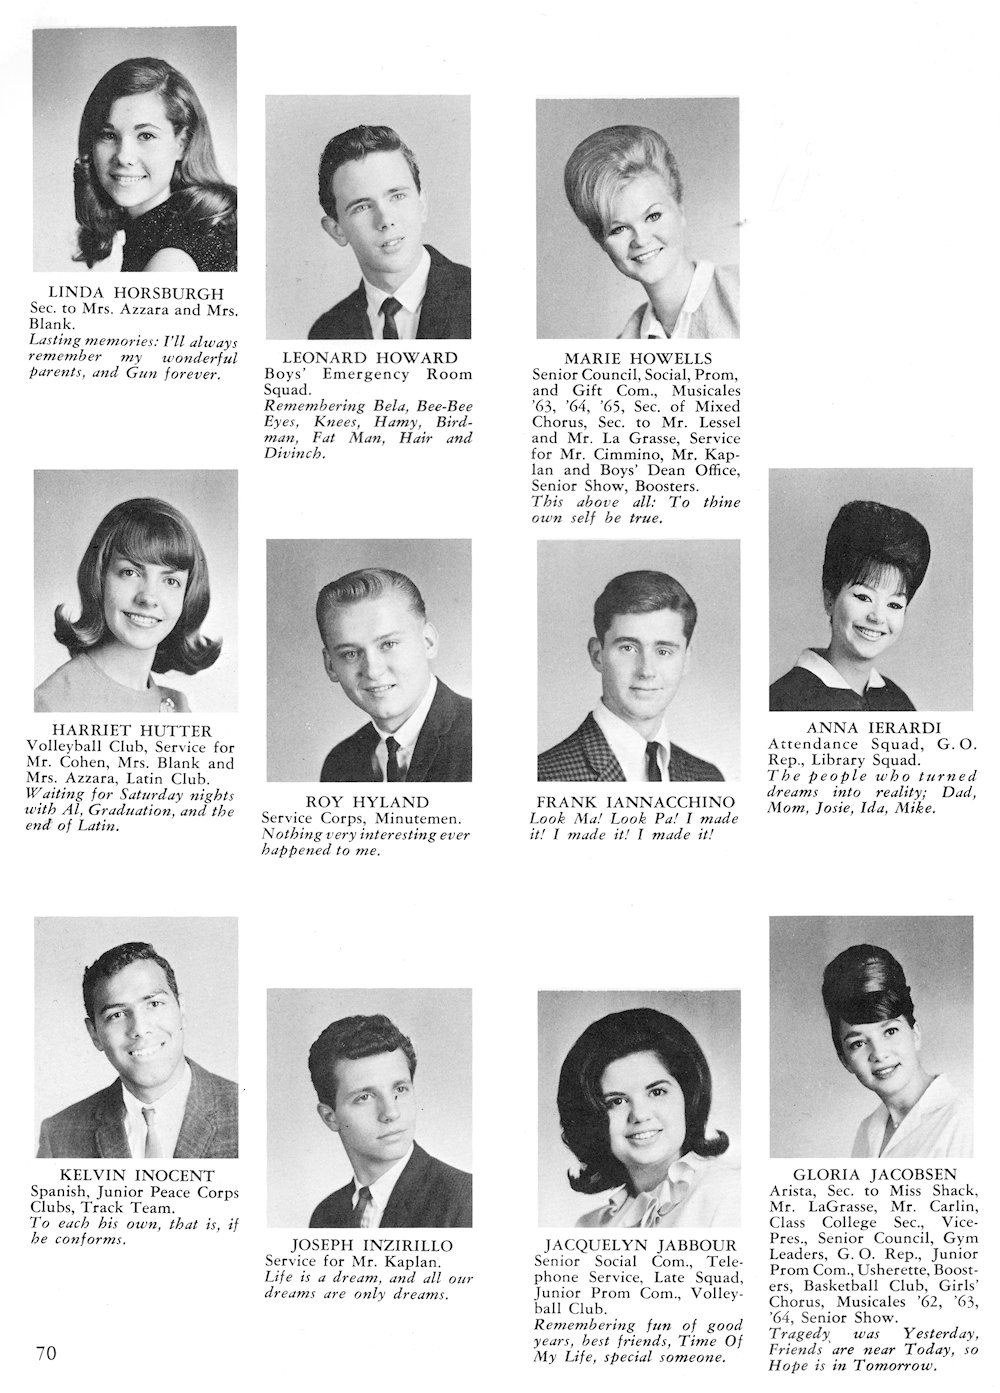 Horsburgh-Jacobsen page from Fort Hamilton High School 1965